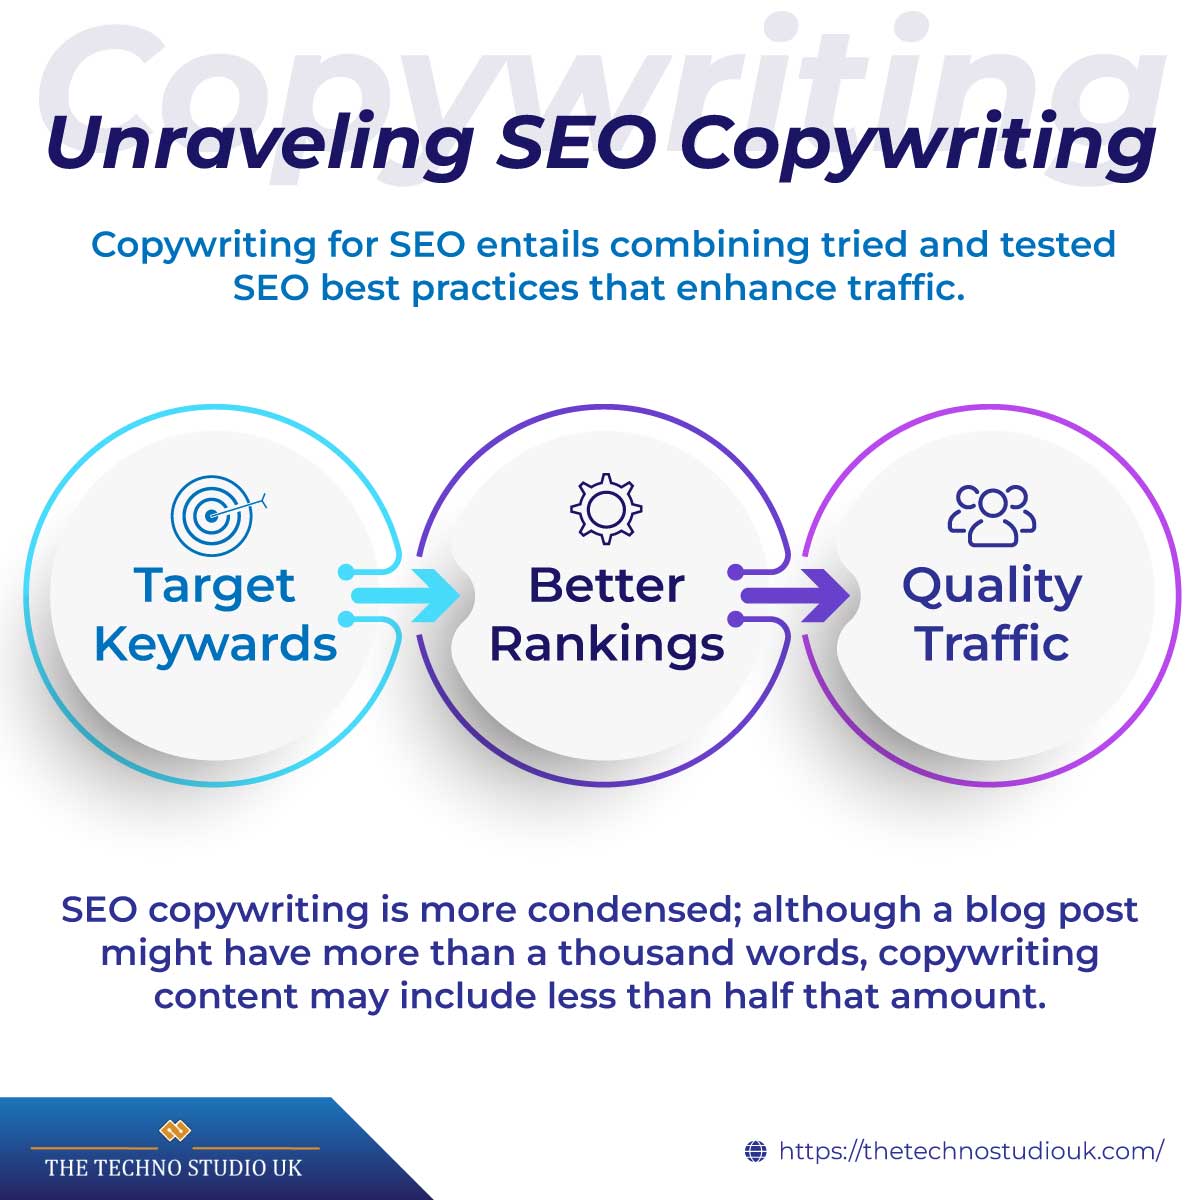 5 Search Engine Optimization Copywriting Tips To Boost Your Rankings